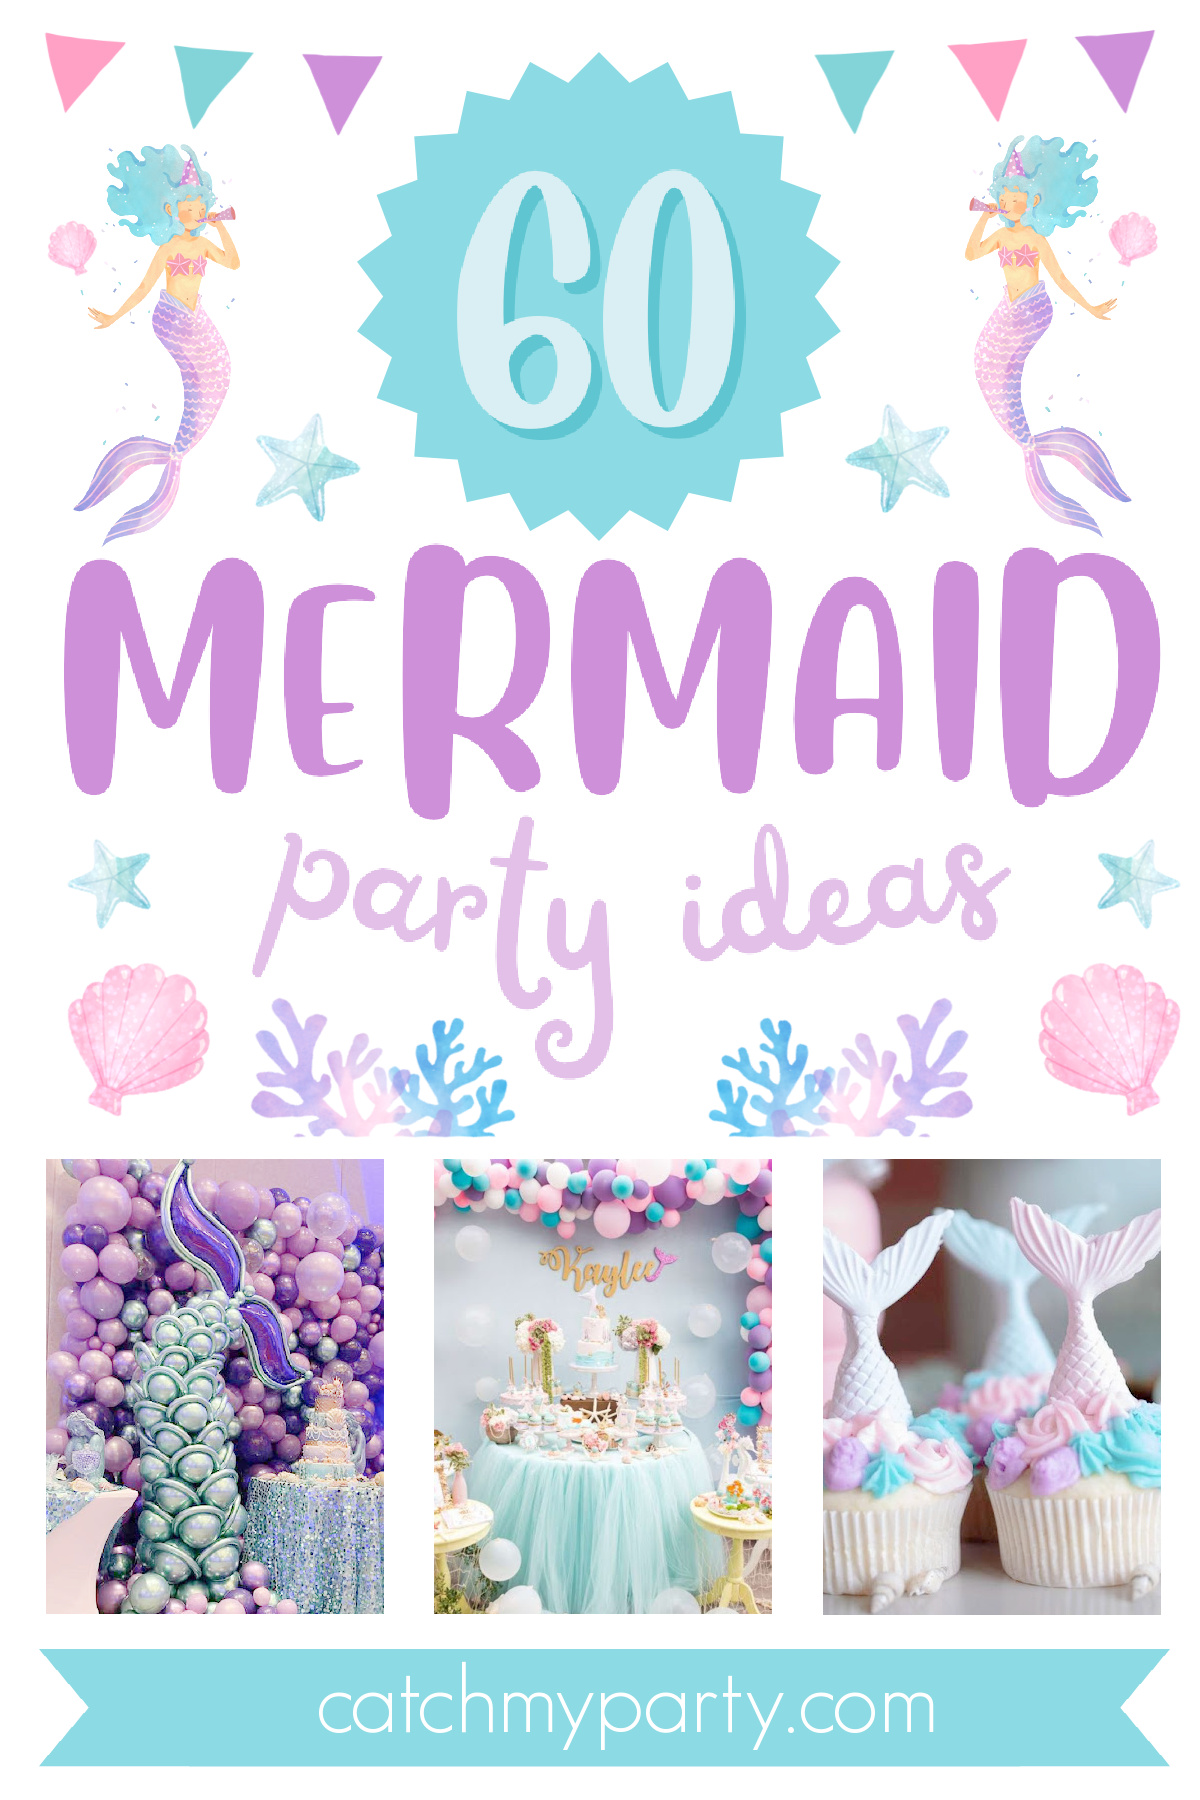 60 Ideas for Throwing the Ultimate Mermaid Under the Sea Birthday Party! | CatchMyParty.com